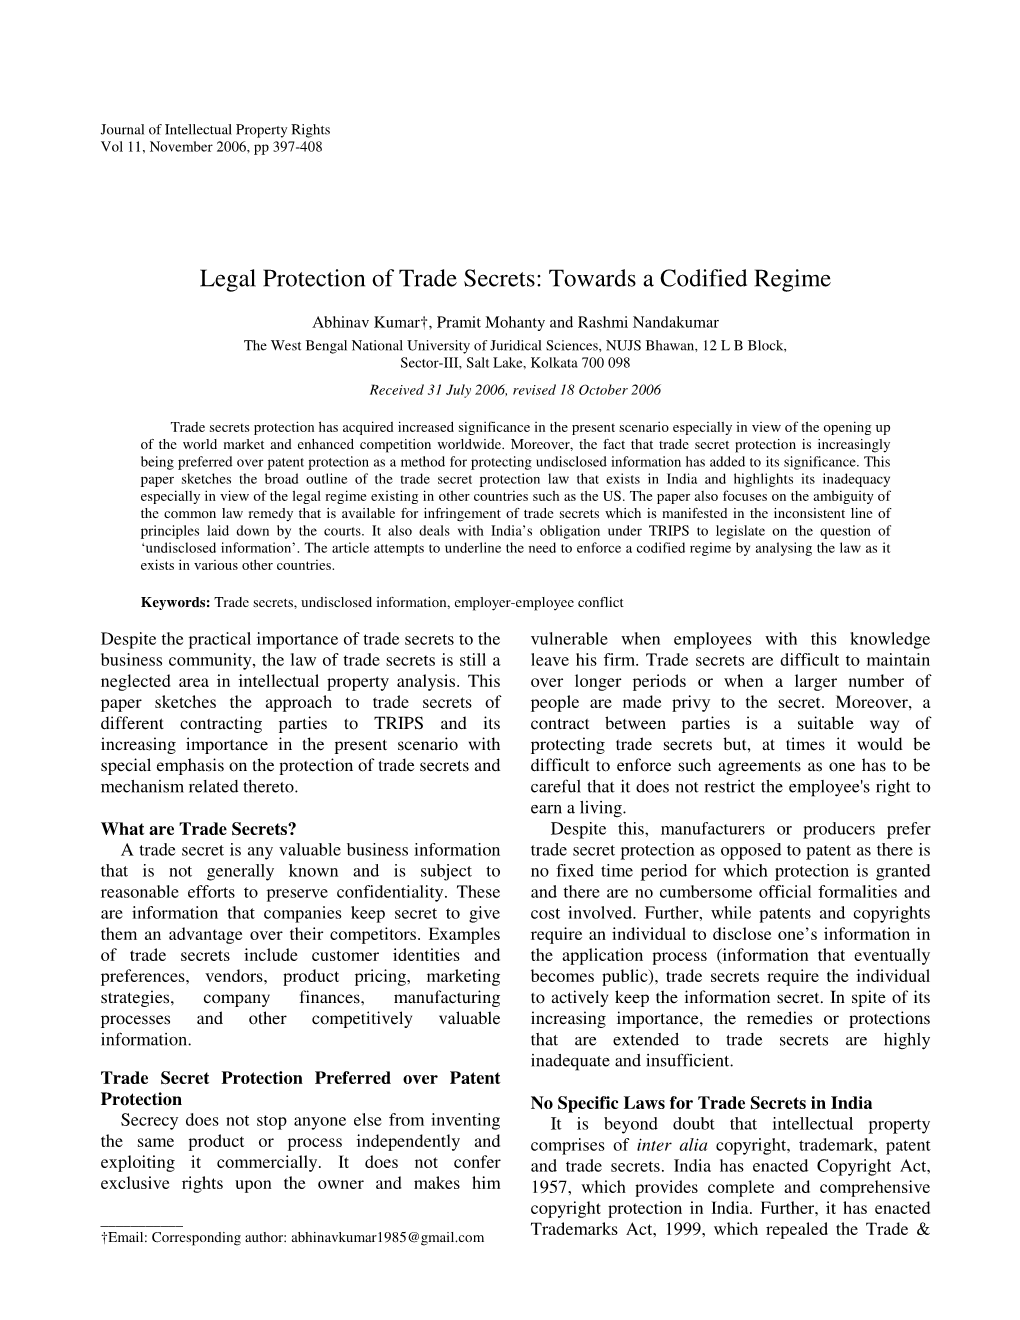 Legal Protection of Trade Secrets: Towards a Codified Regime